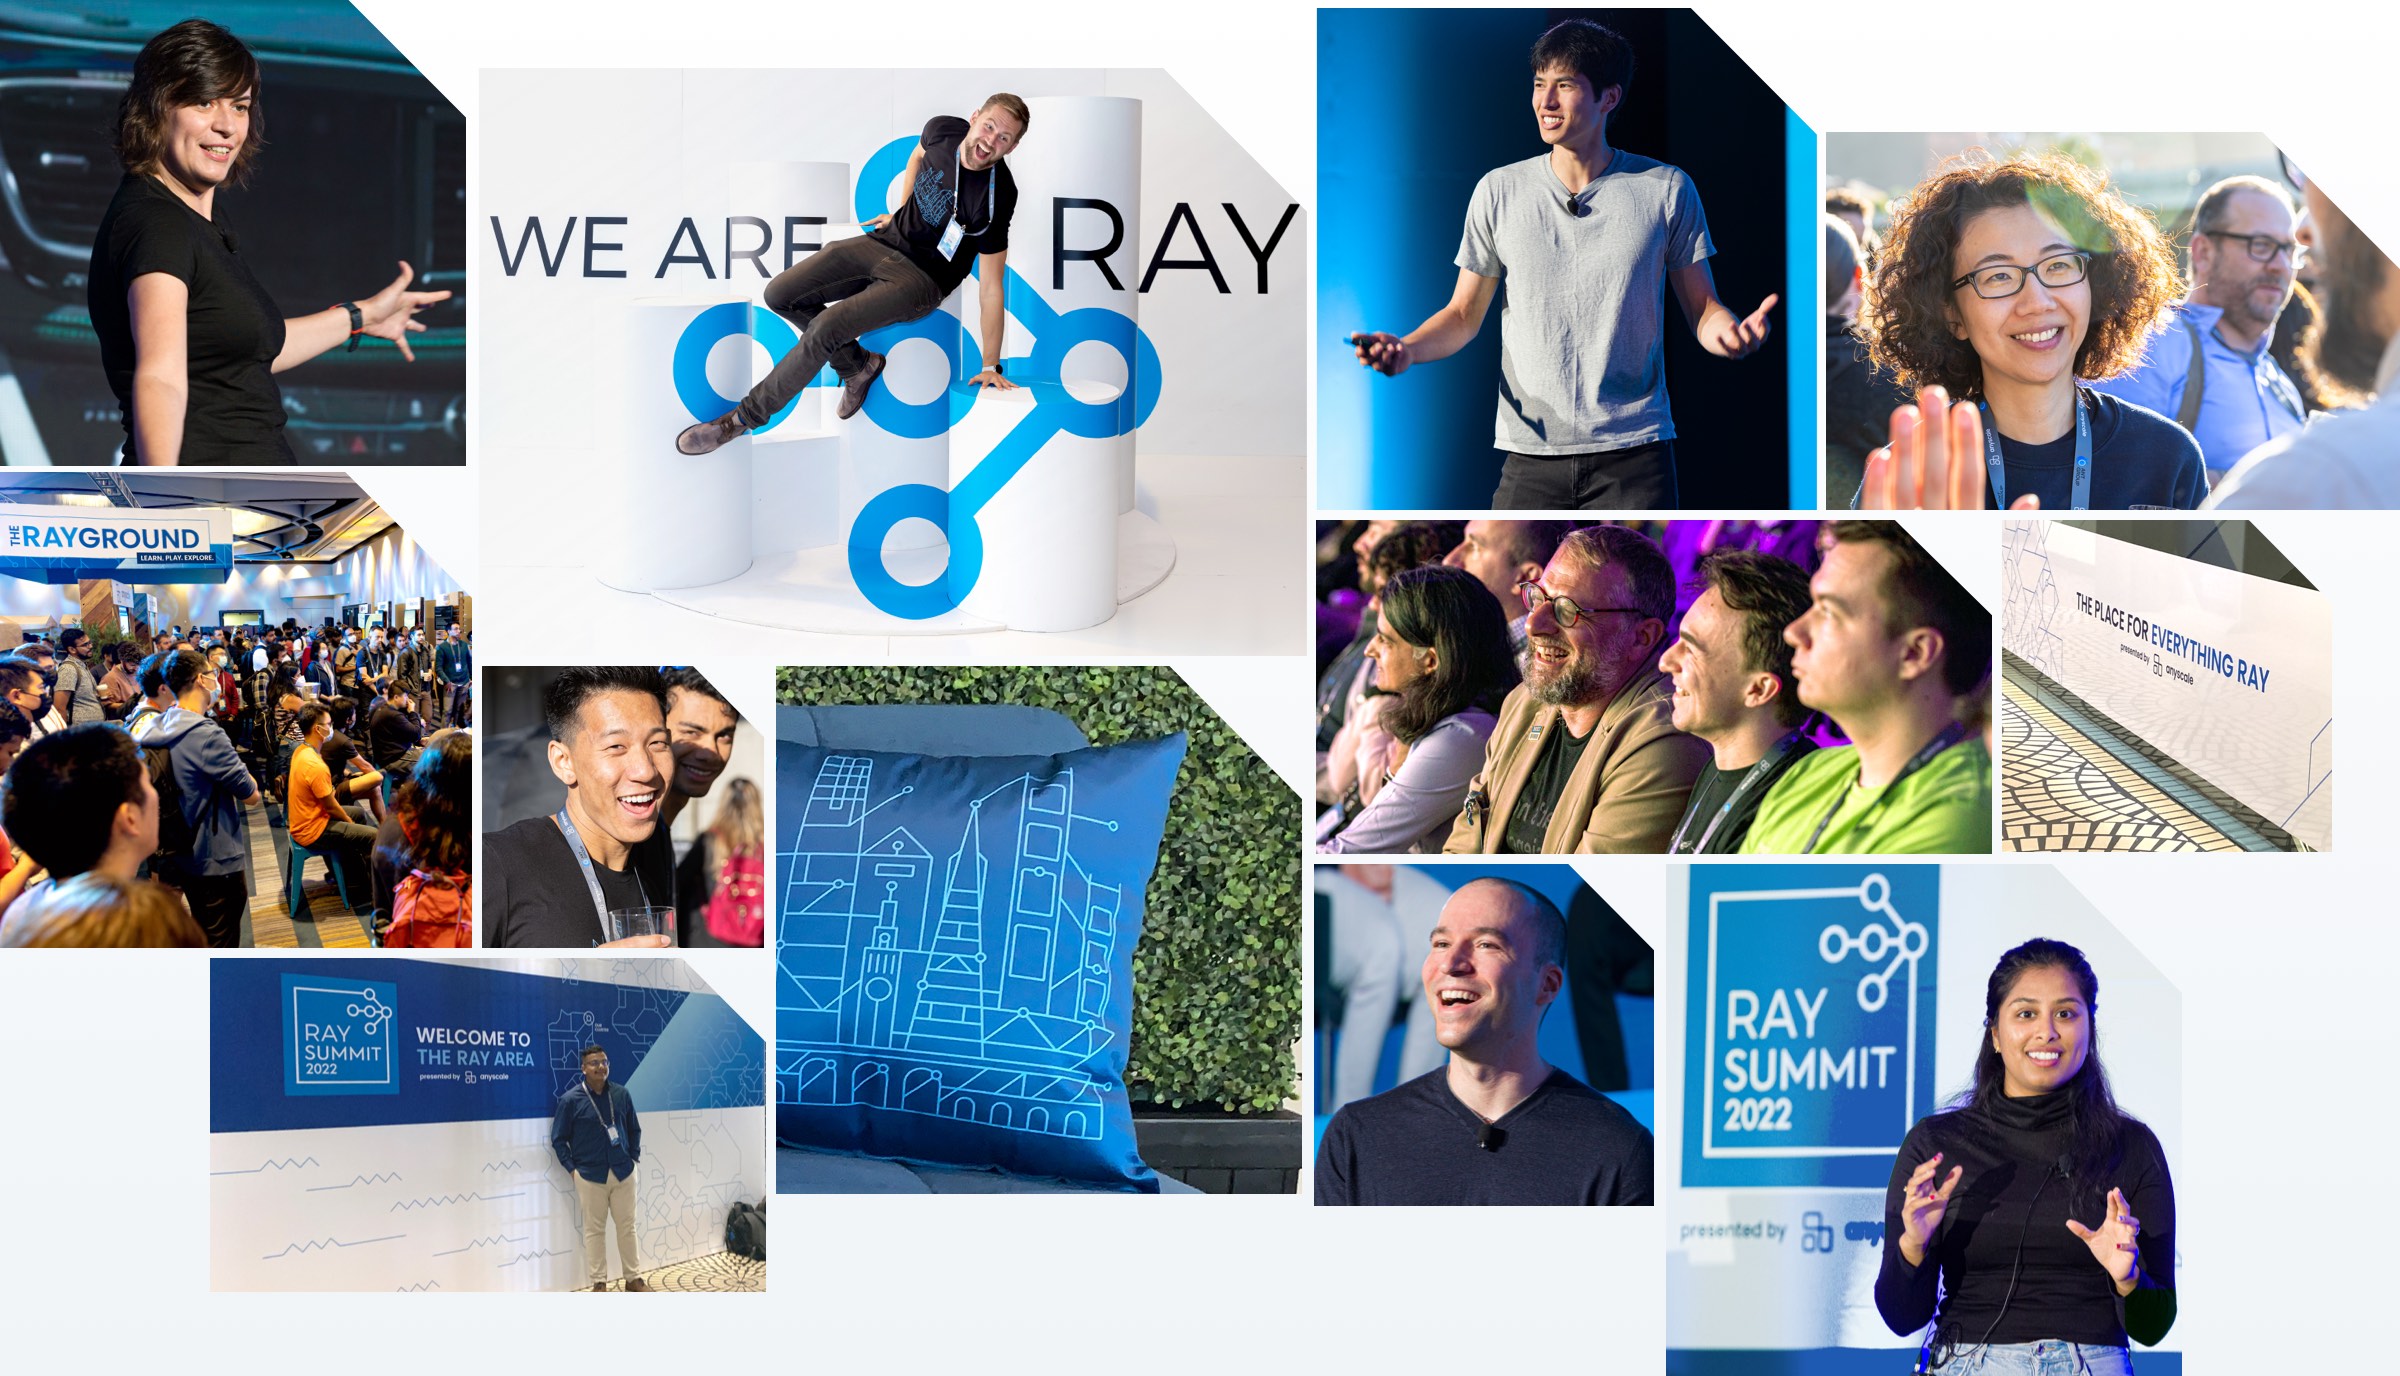 Ray Summit collage of speakers from event